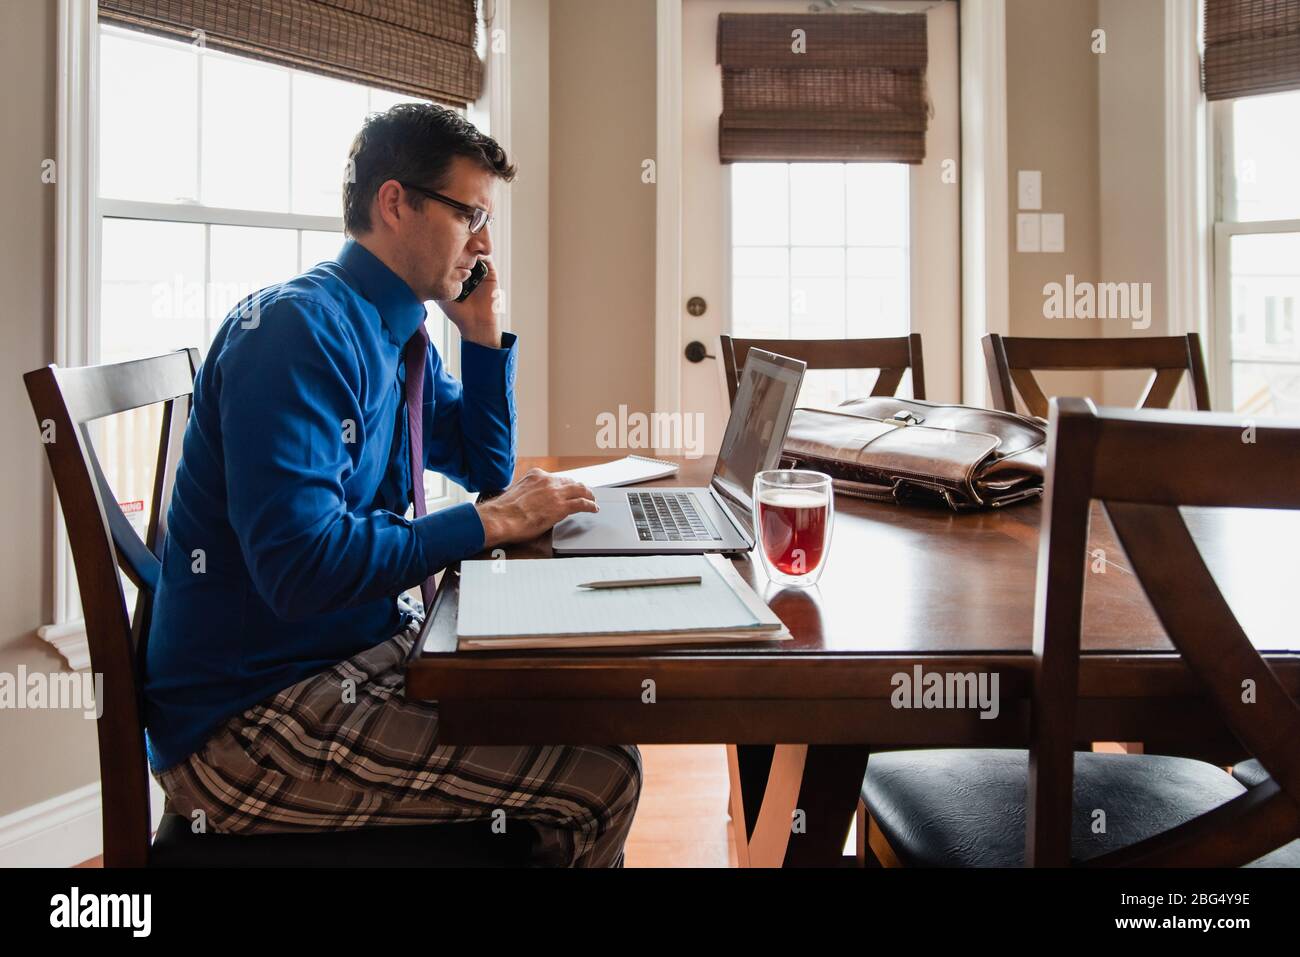 Man on cellphone working from home using a computer in pyjama pants. Stock Photo